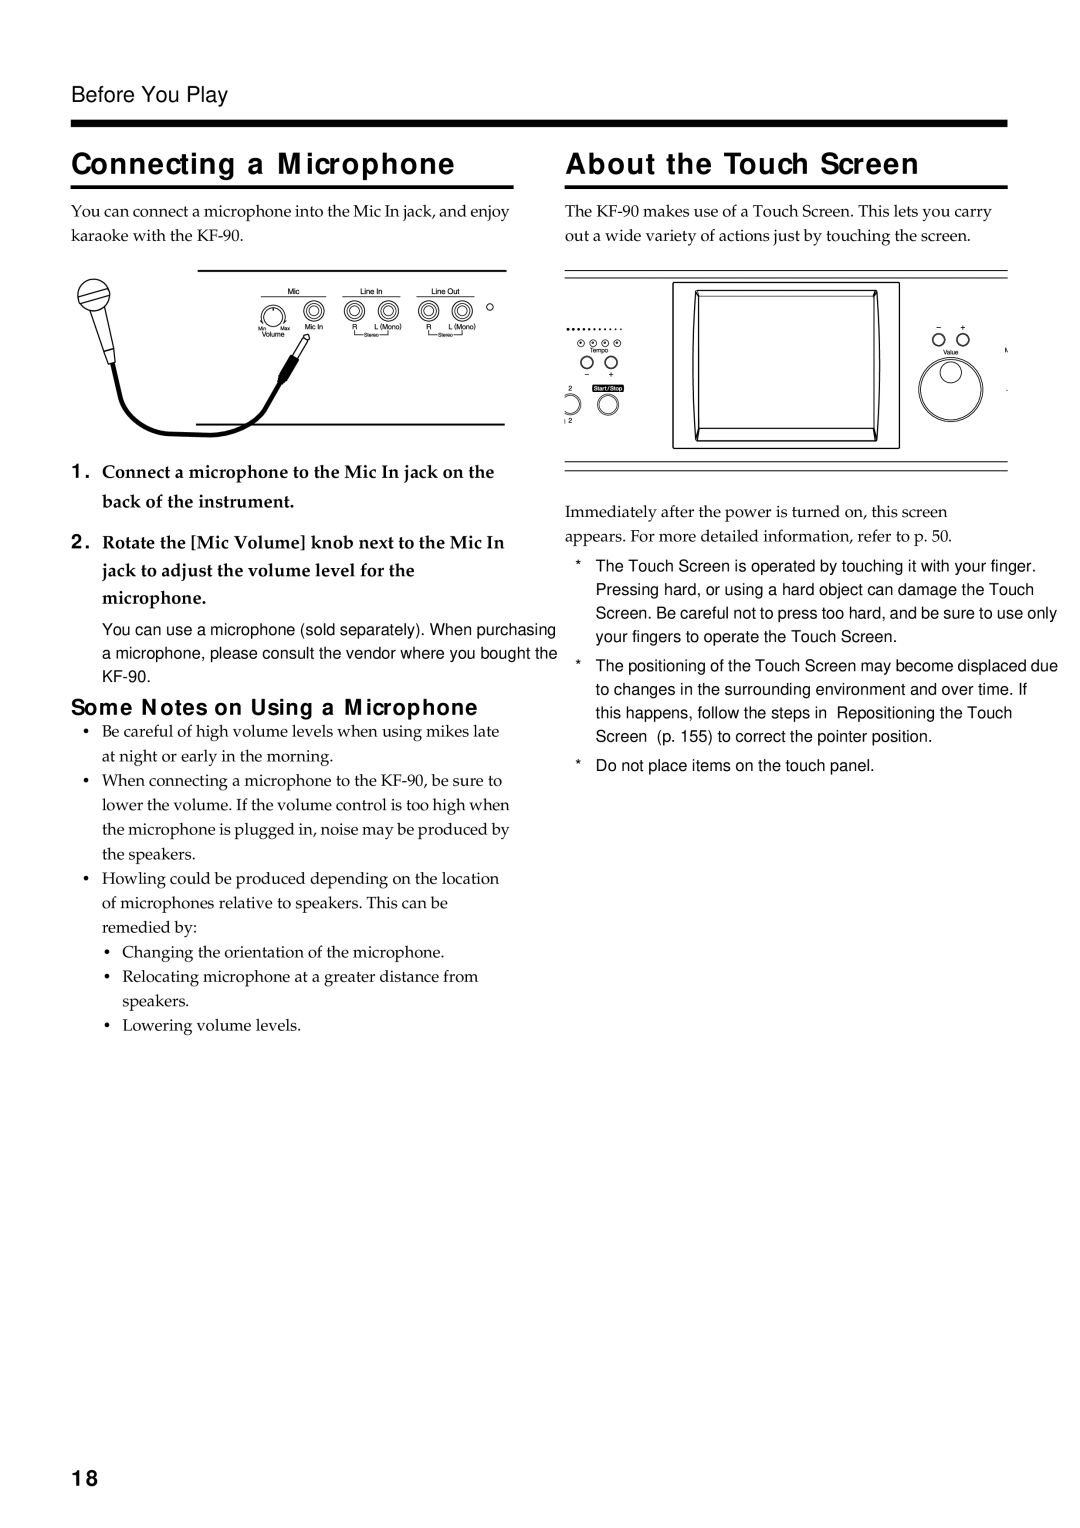 Roland KF-90 owner manual Connecting a Microphone, About the Touch Screen, Some Notes on Using a Microphone 